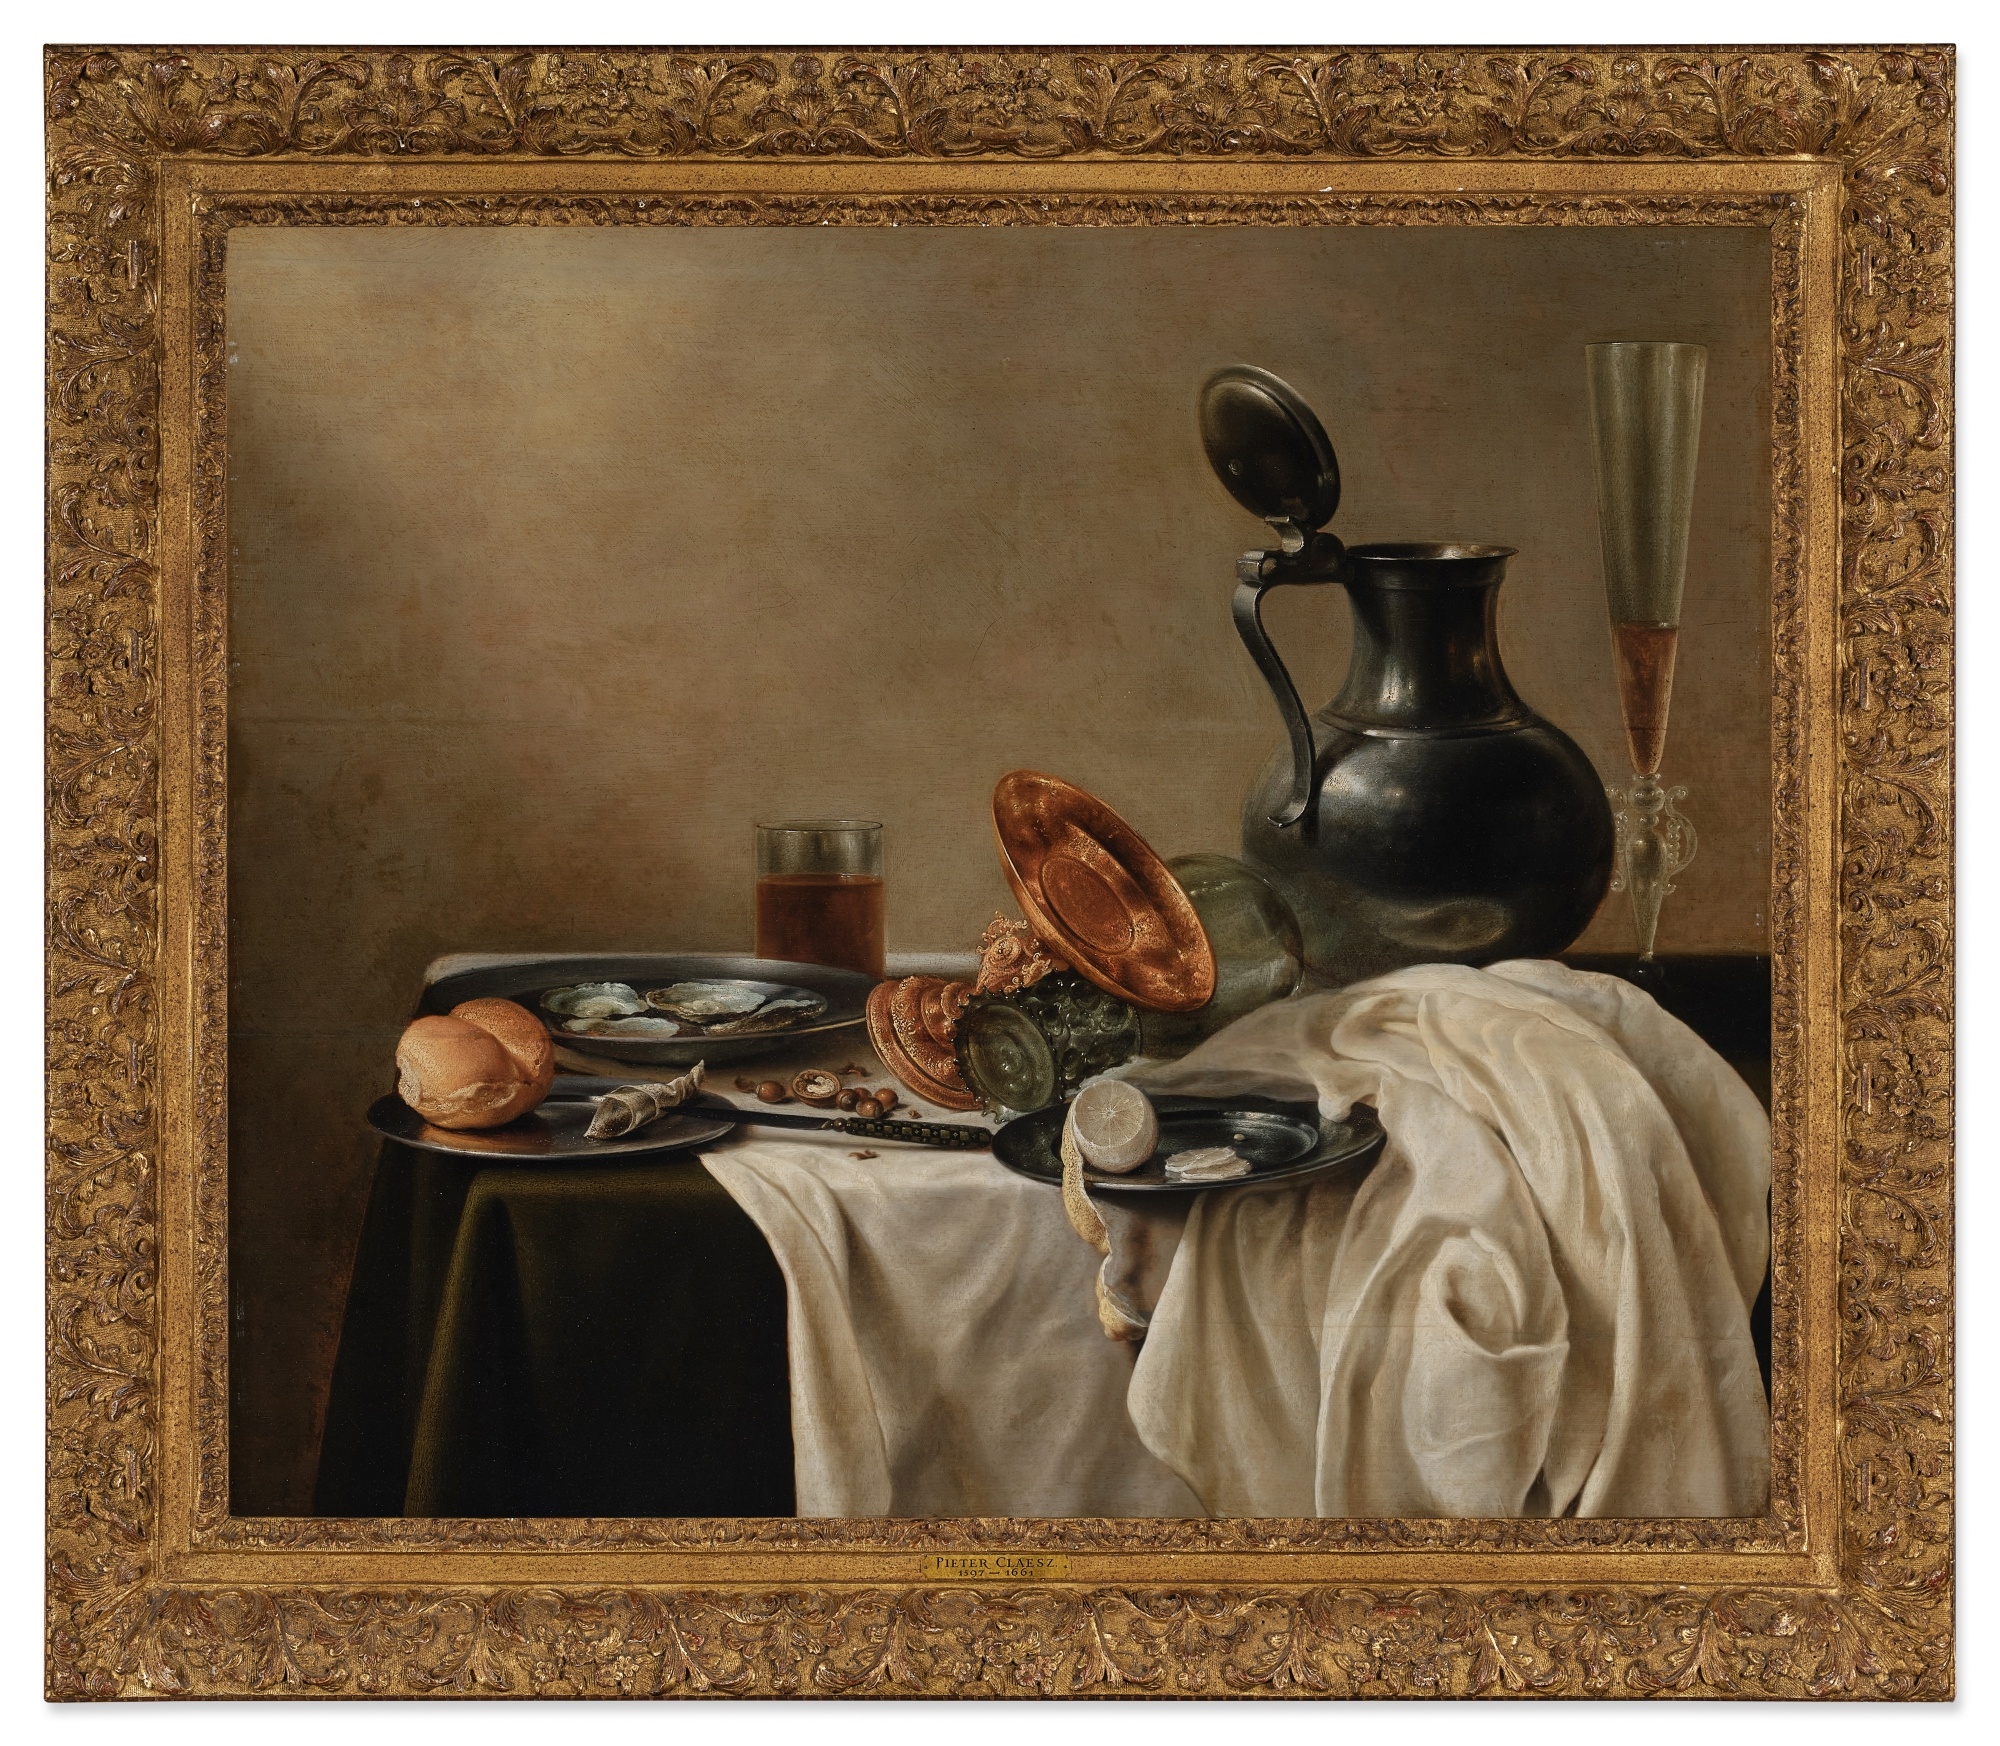 Artwork by Pieter Claesz, Still Life with a Gilt Tazza, a Pewter Jug and a Fluted Wine Glass, Together with a Lemon, a Bread Roll, Oysters and Tobacco on Plates, All on a Wooden Table Draped with Dark Green and White Cloths, Made of oil on panel panel